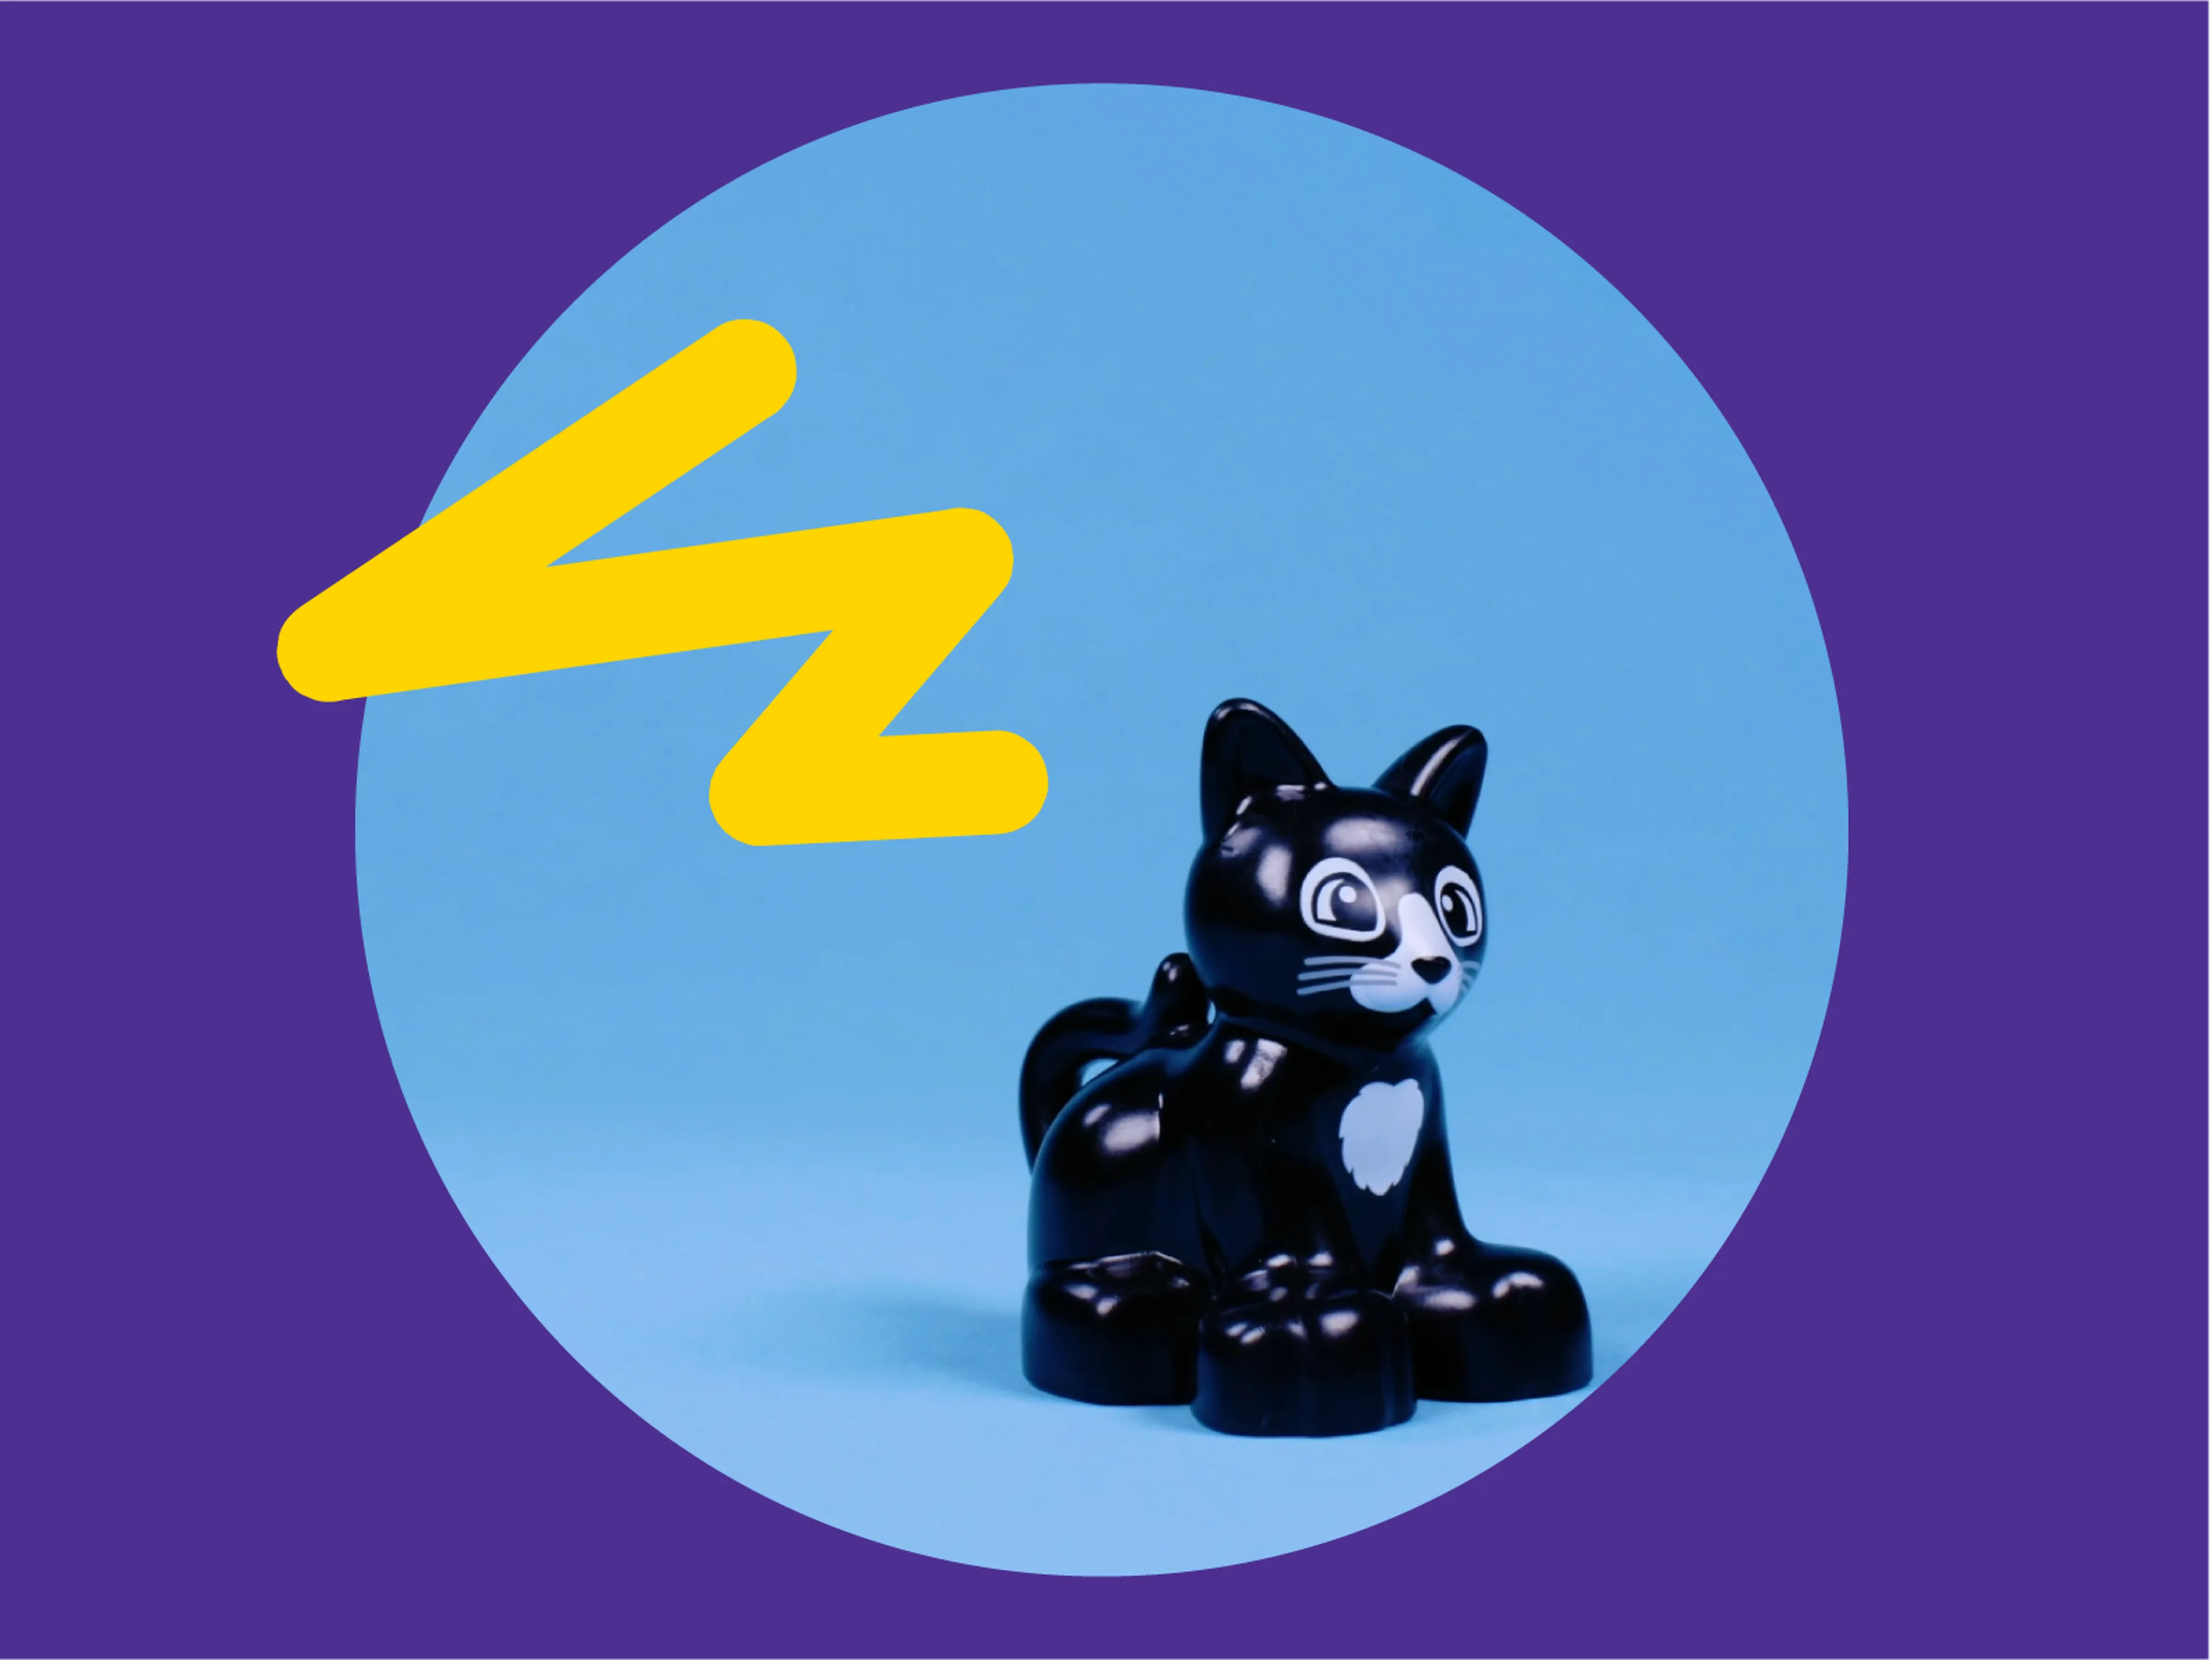 An image of a LEGO DUPLO cat